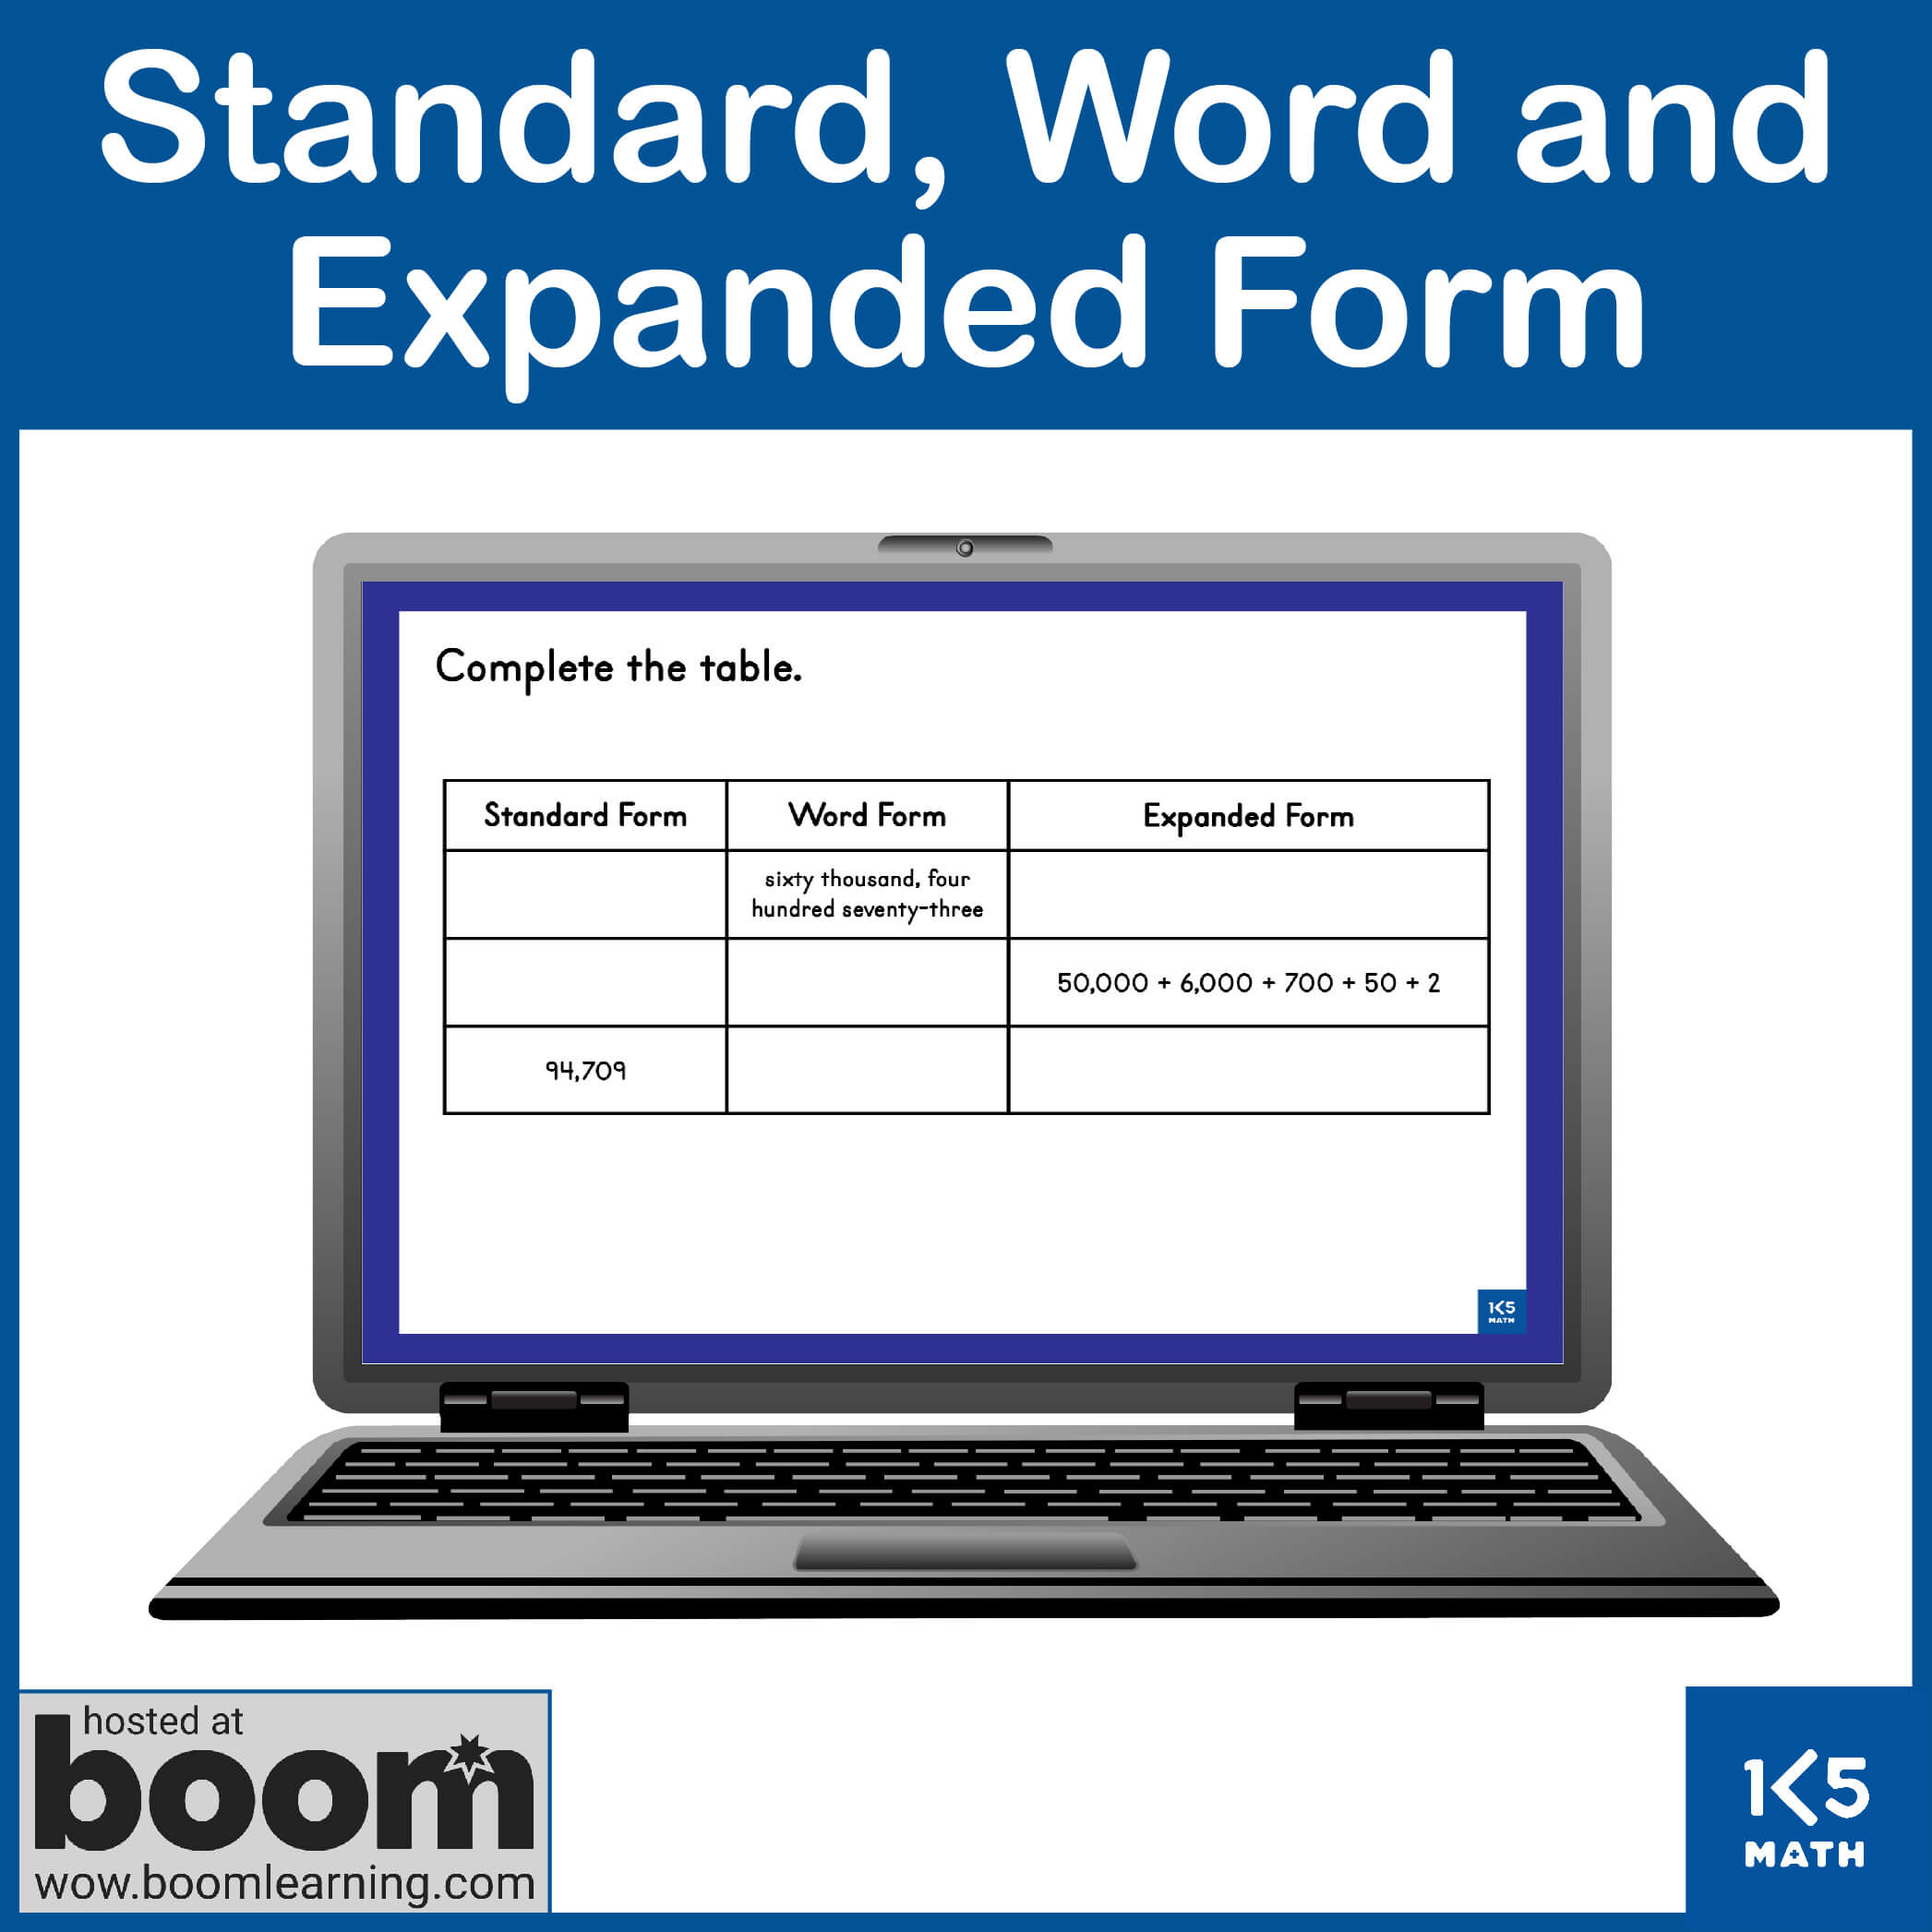 Boom Cards: Standard, Word and Expanded Form